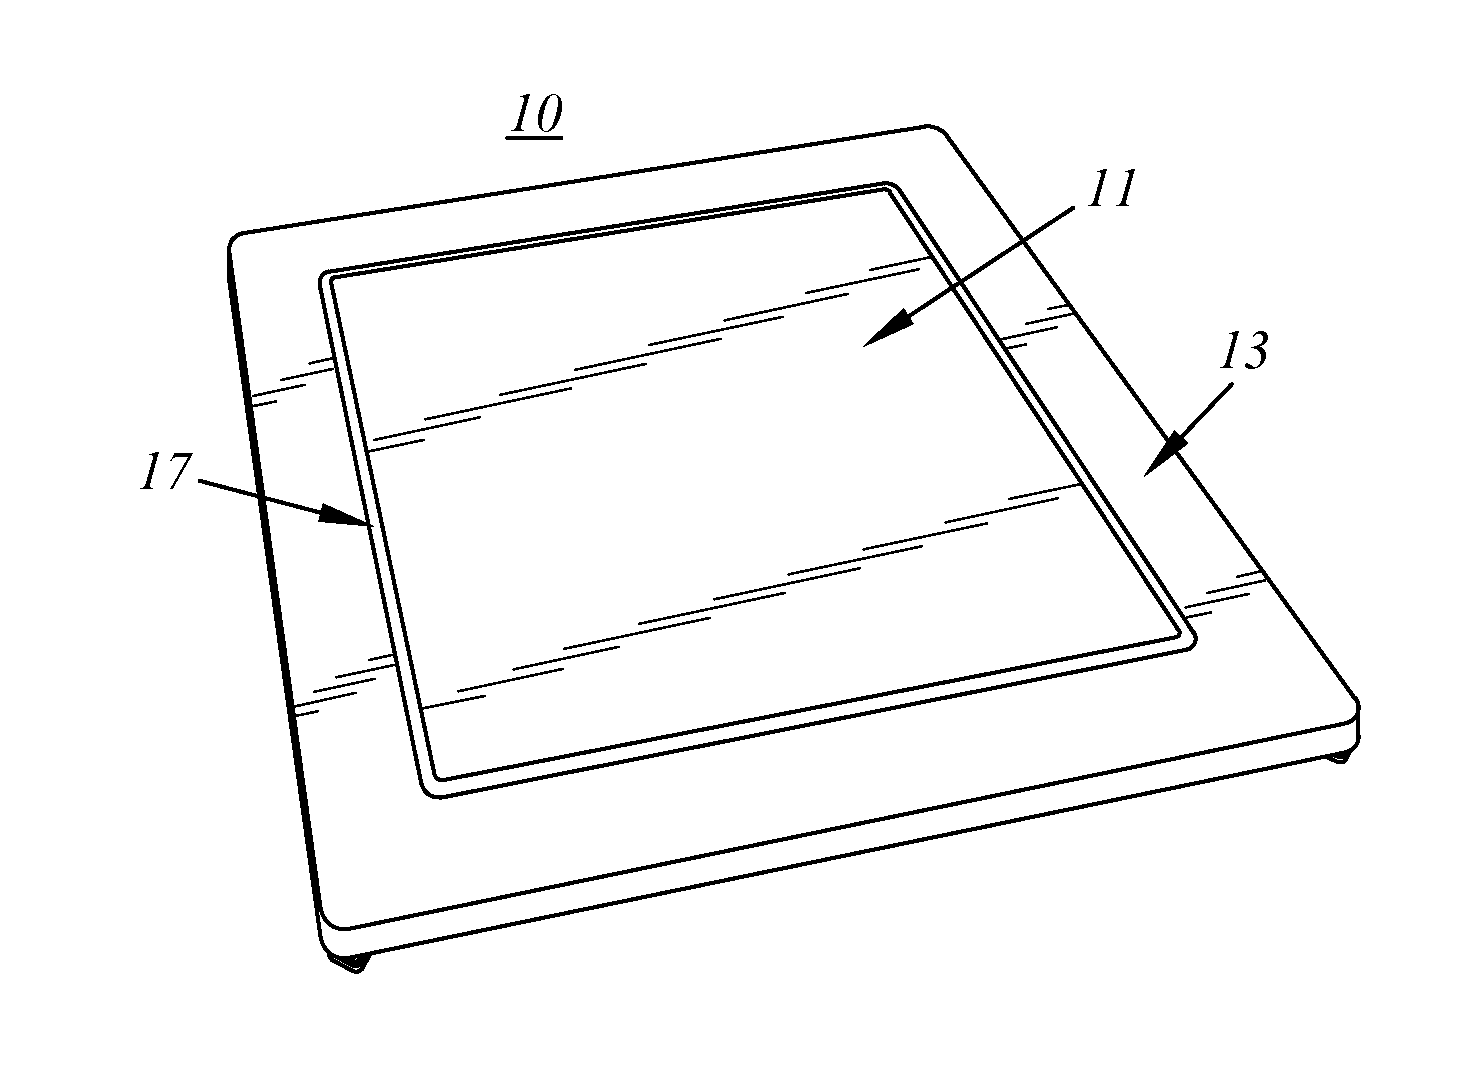 Magnetic latching system with inflatable seal